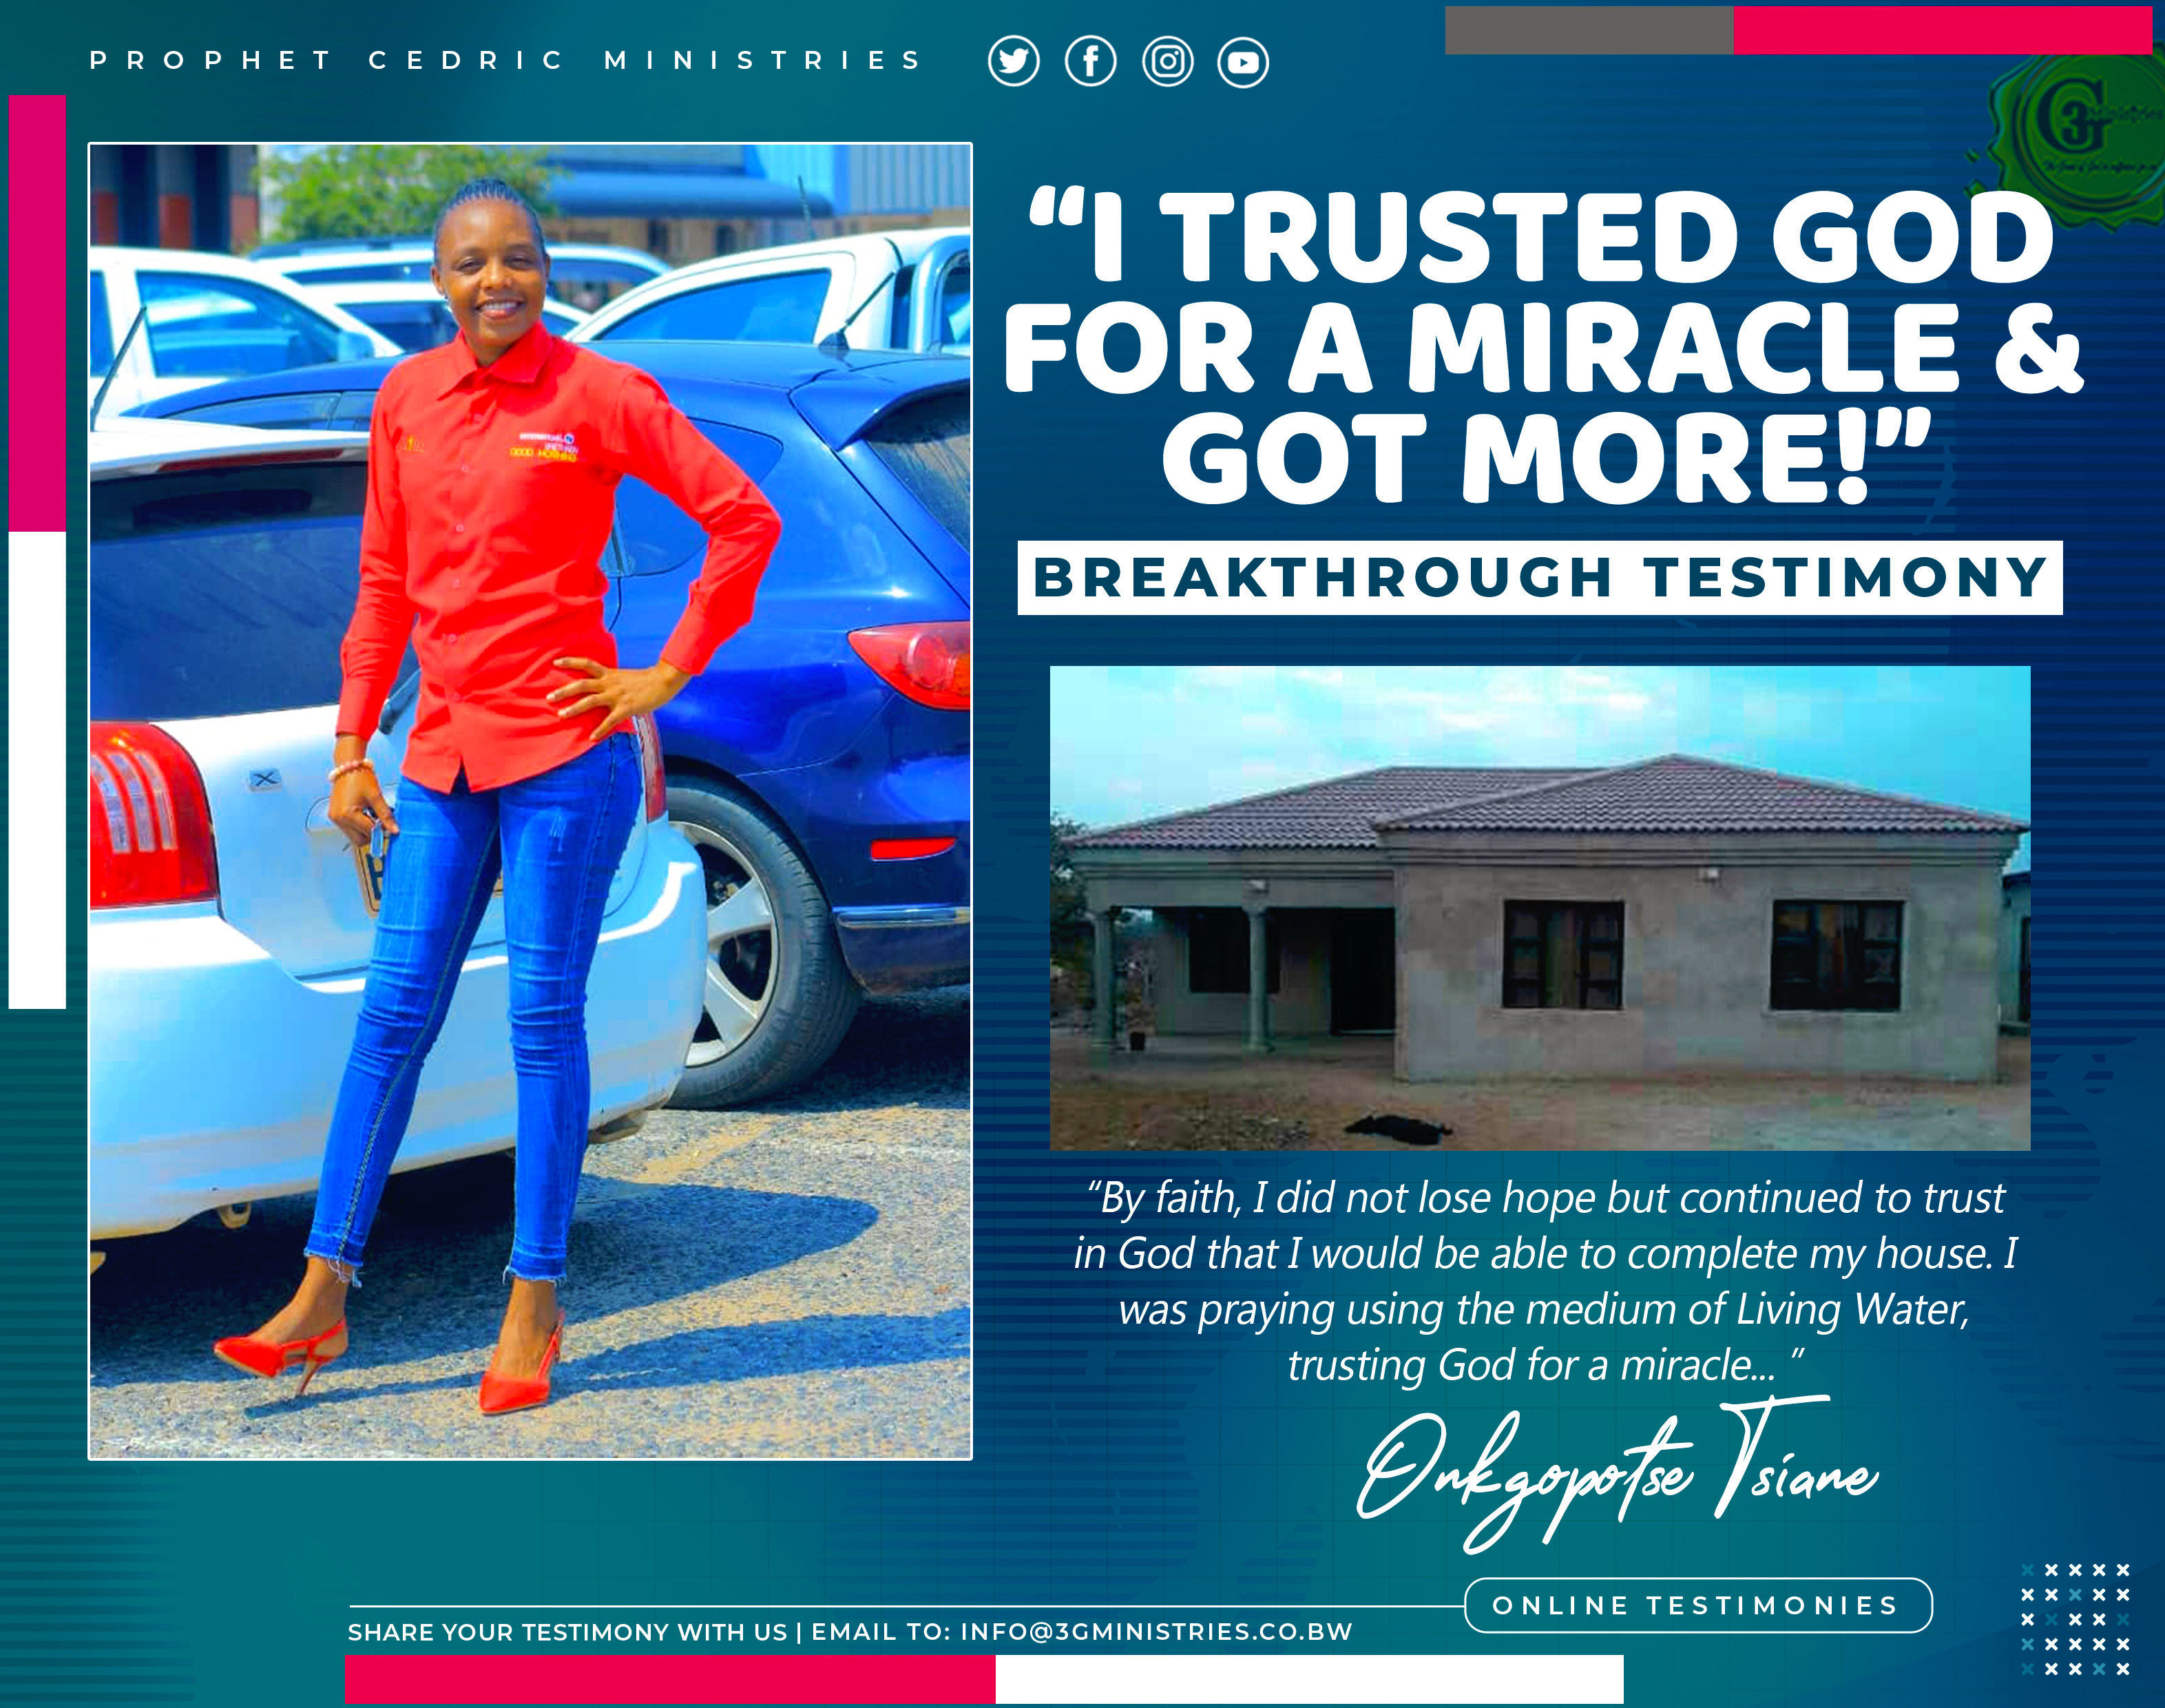 “I TRUSTED GOD FOR A MIRACLE & GOT MORE!”